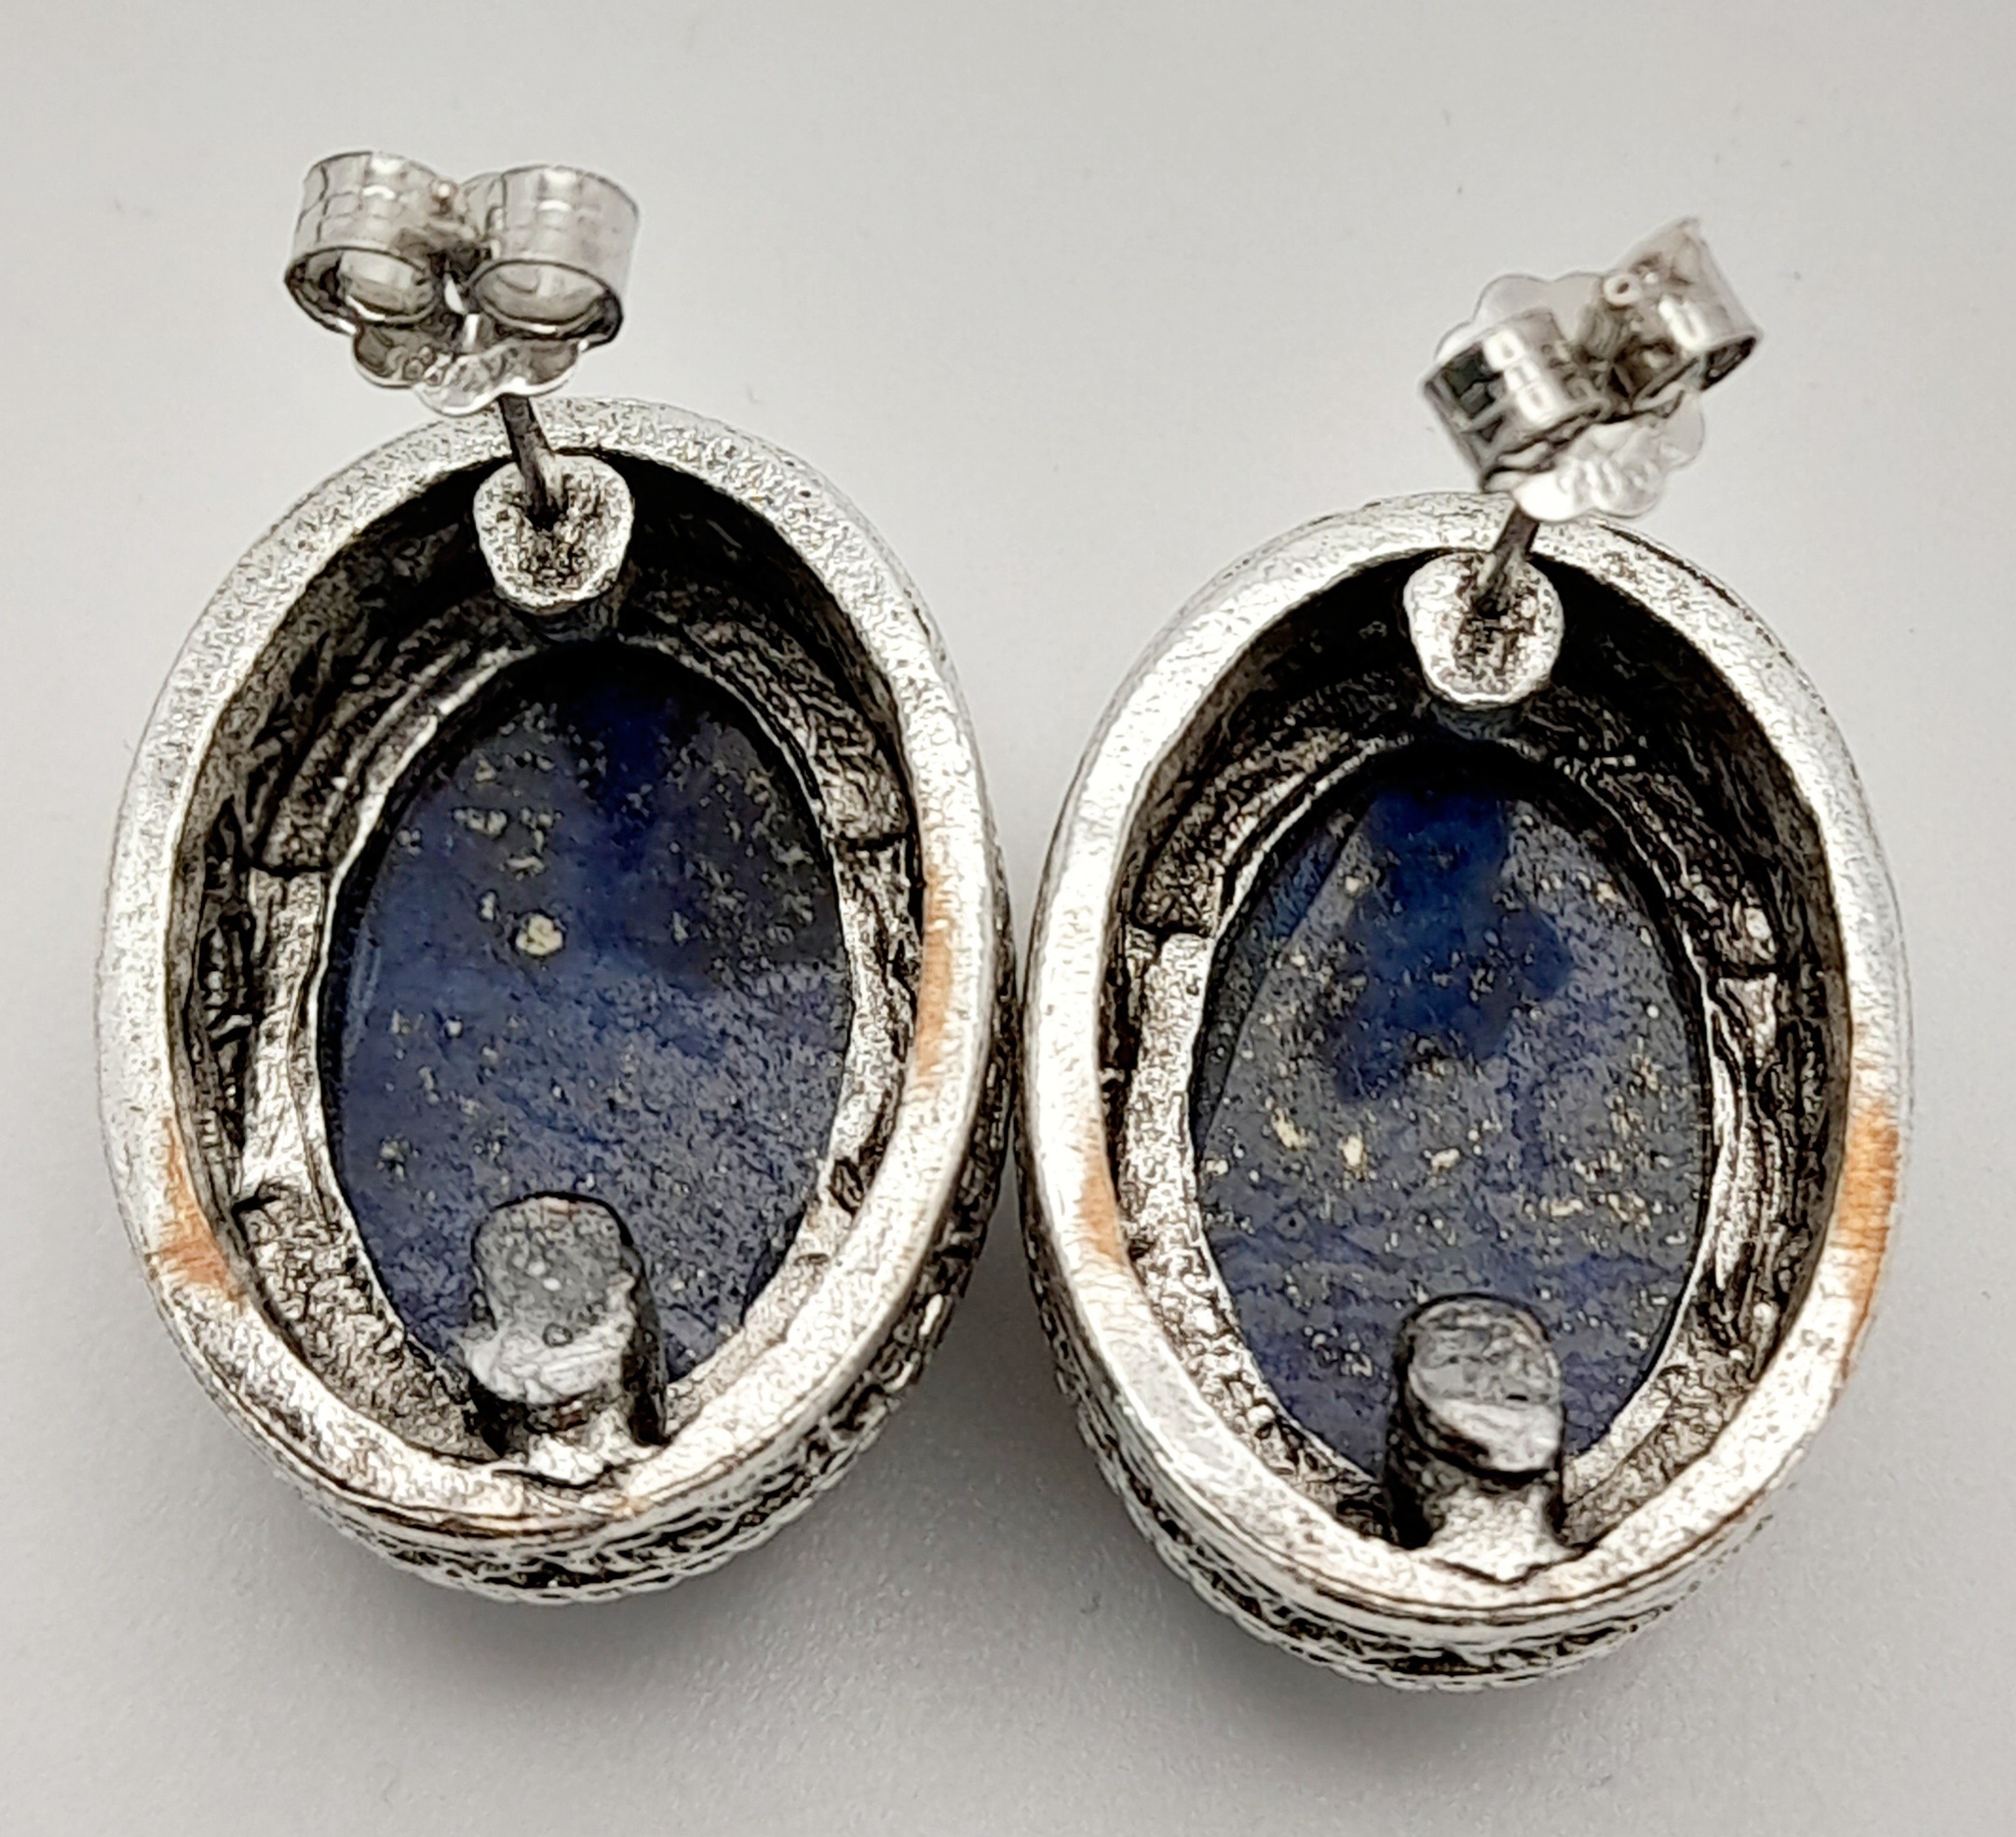 A Lapis Lazuli Jewellery Suite. Cabochon necklace, earrings and ring - size R. - Image 3 of 7